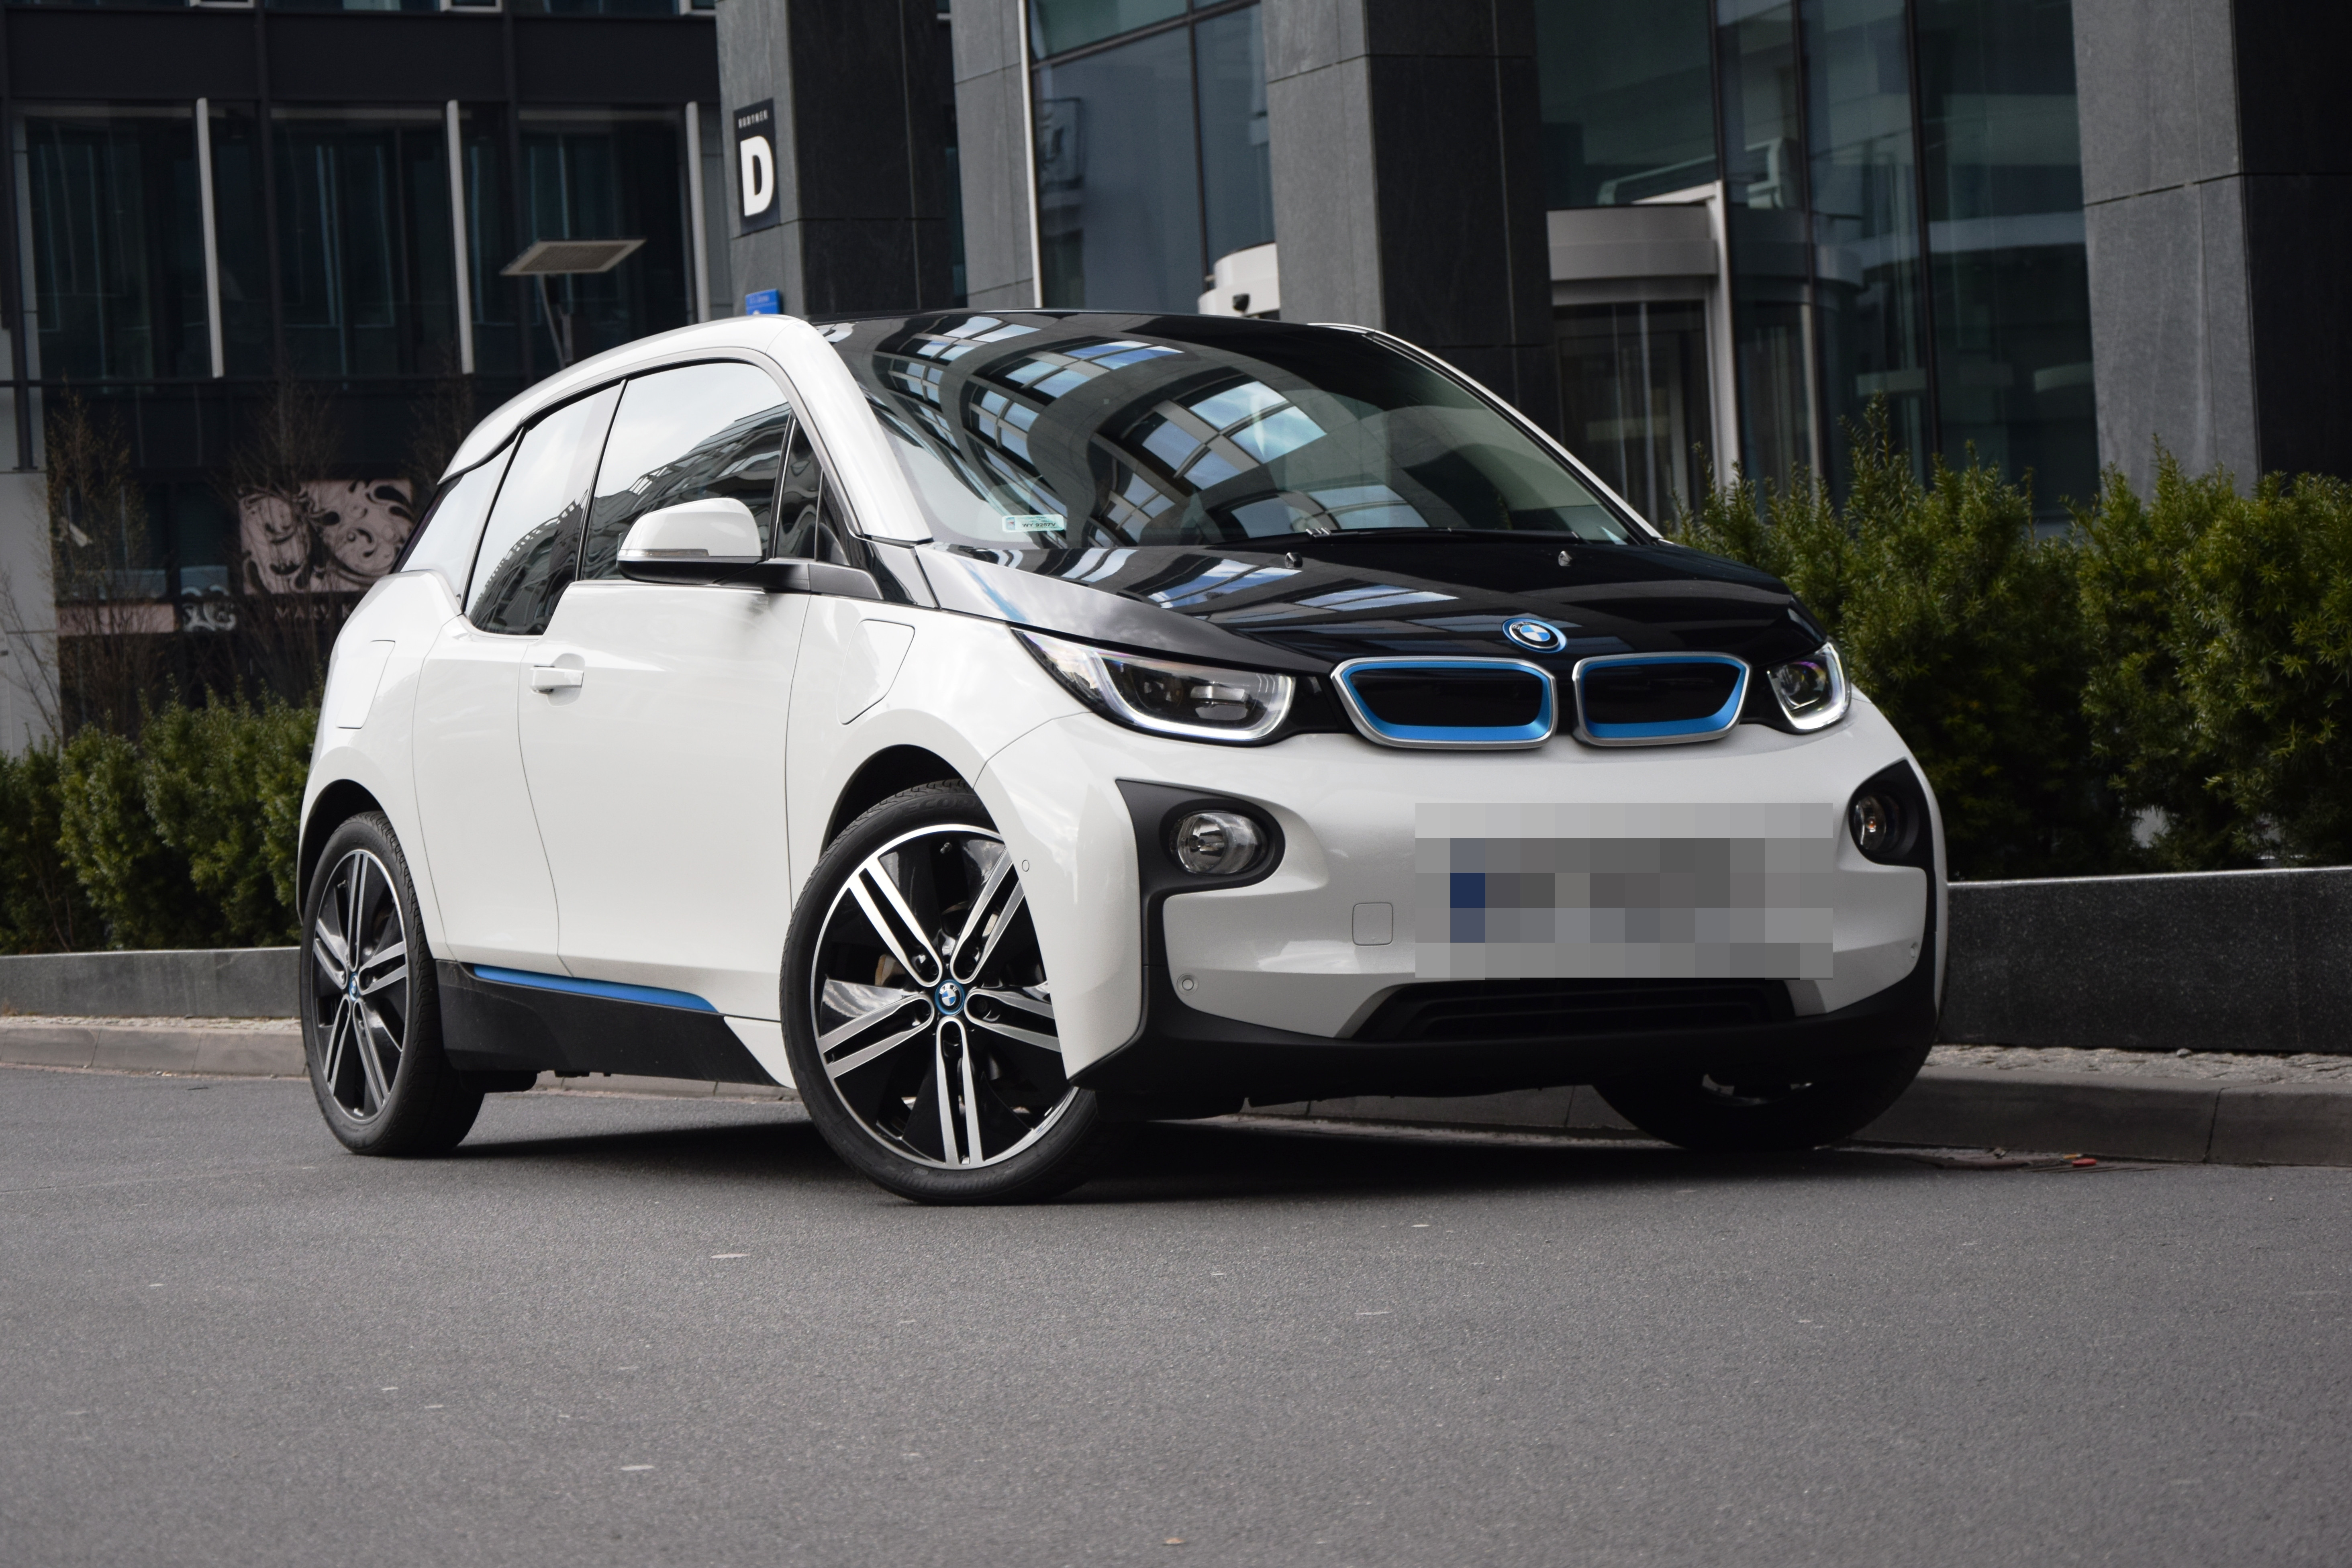 BMW i3 was said to be one of the best used electric cars earlier this year